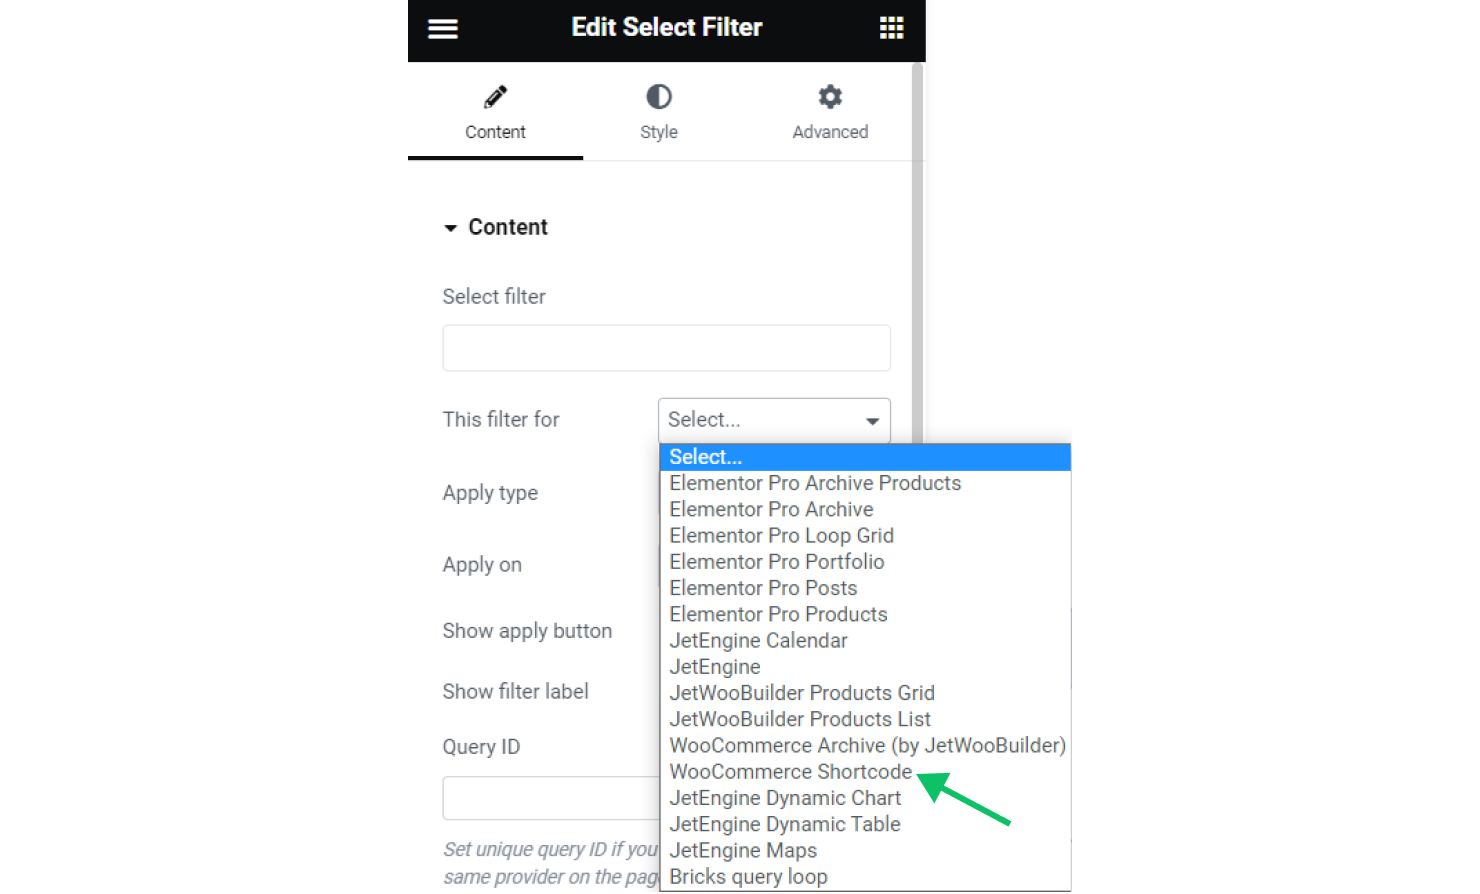 filtering woocommerce shortcode with jetsmartfilters